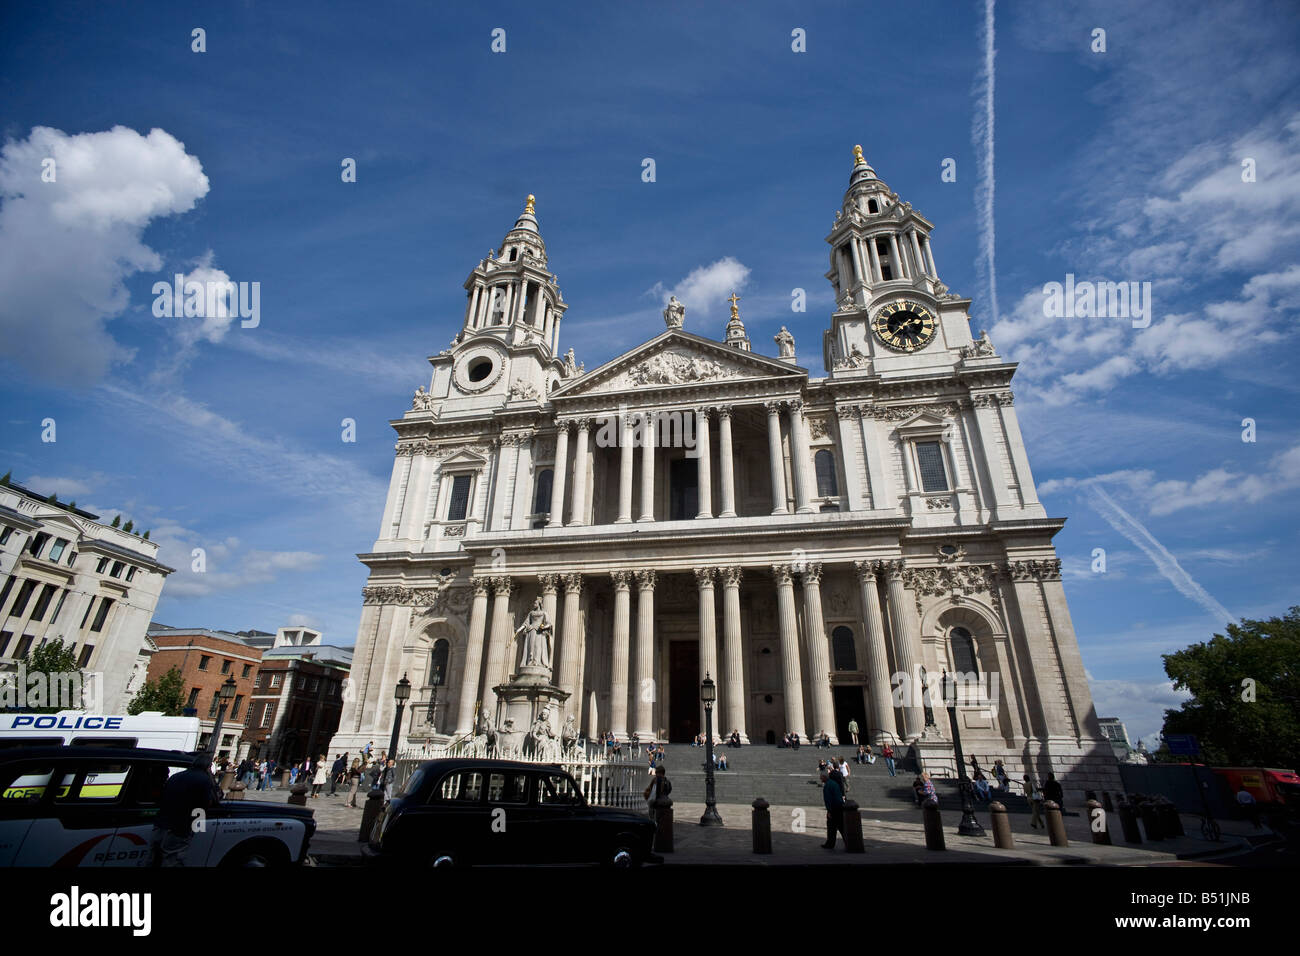 Saint Paul's Cathedral, London, England Stock Photo